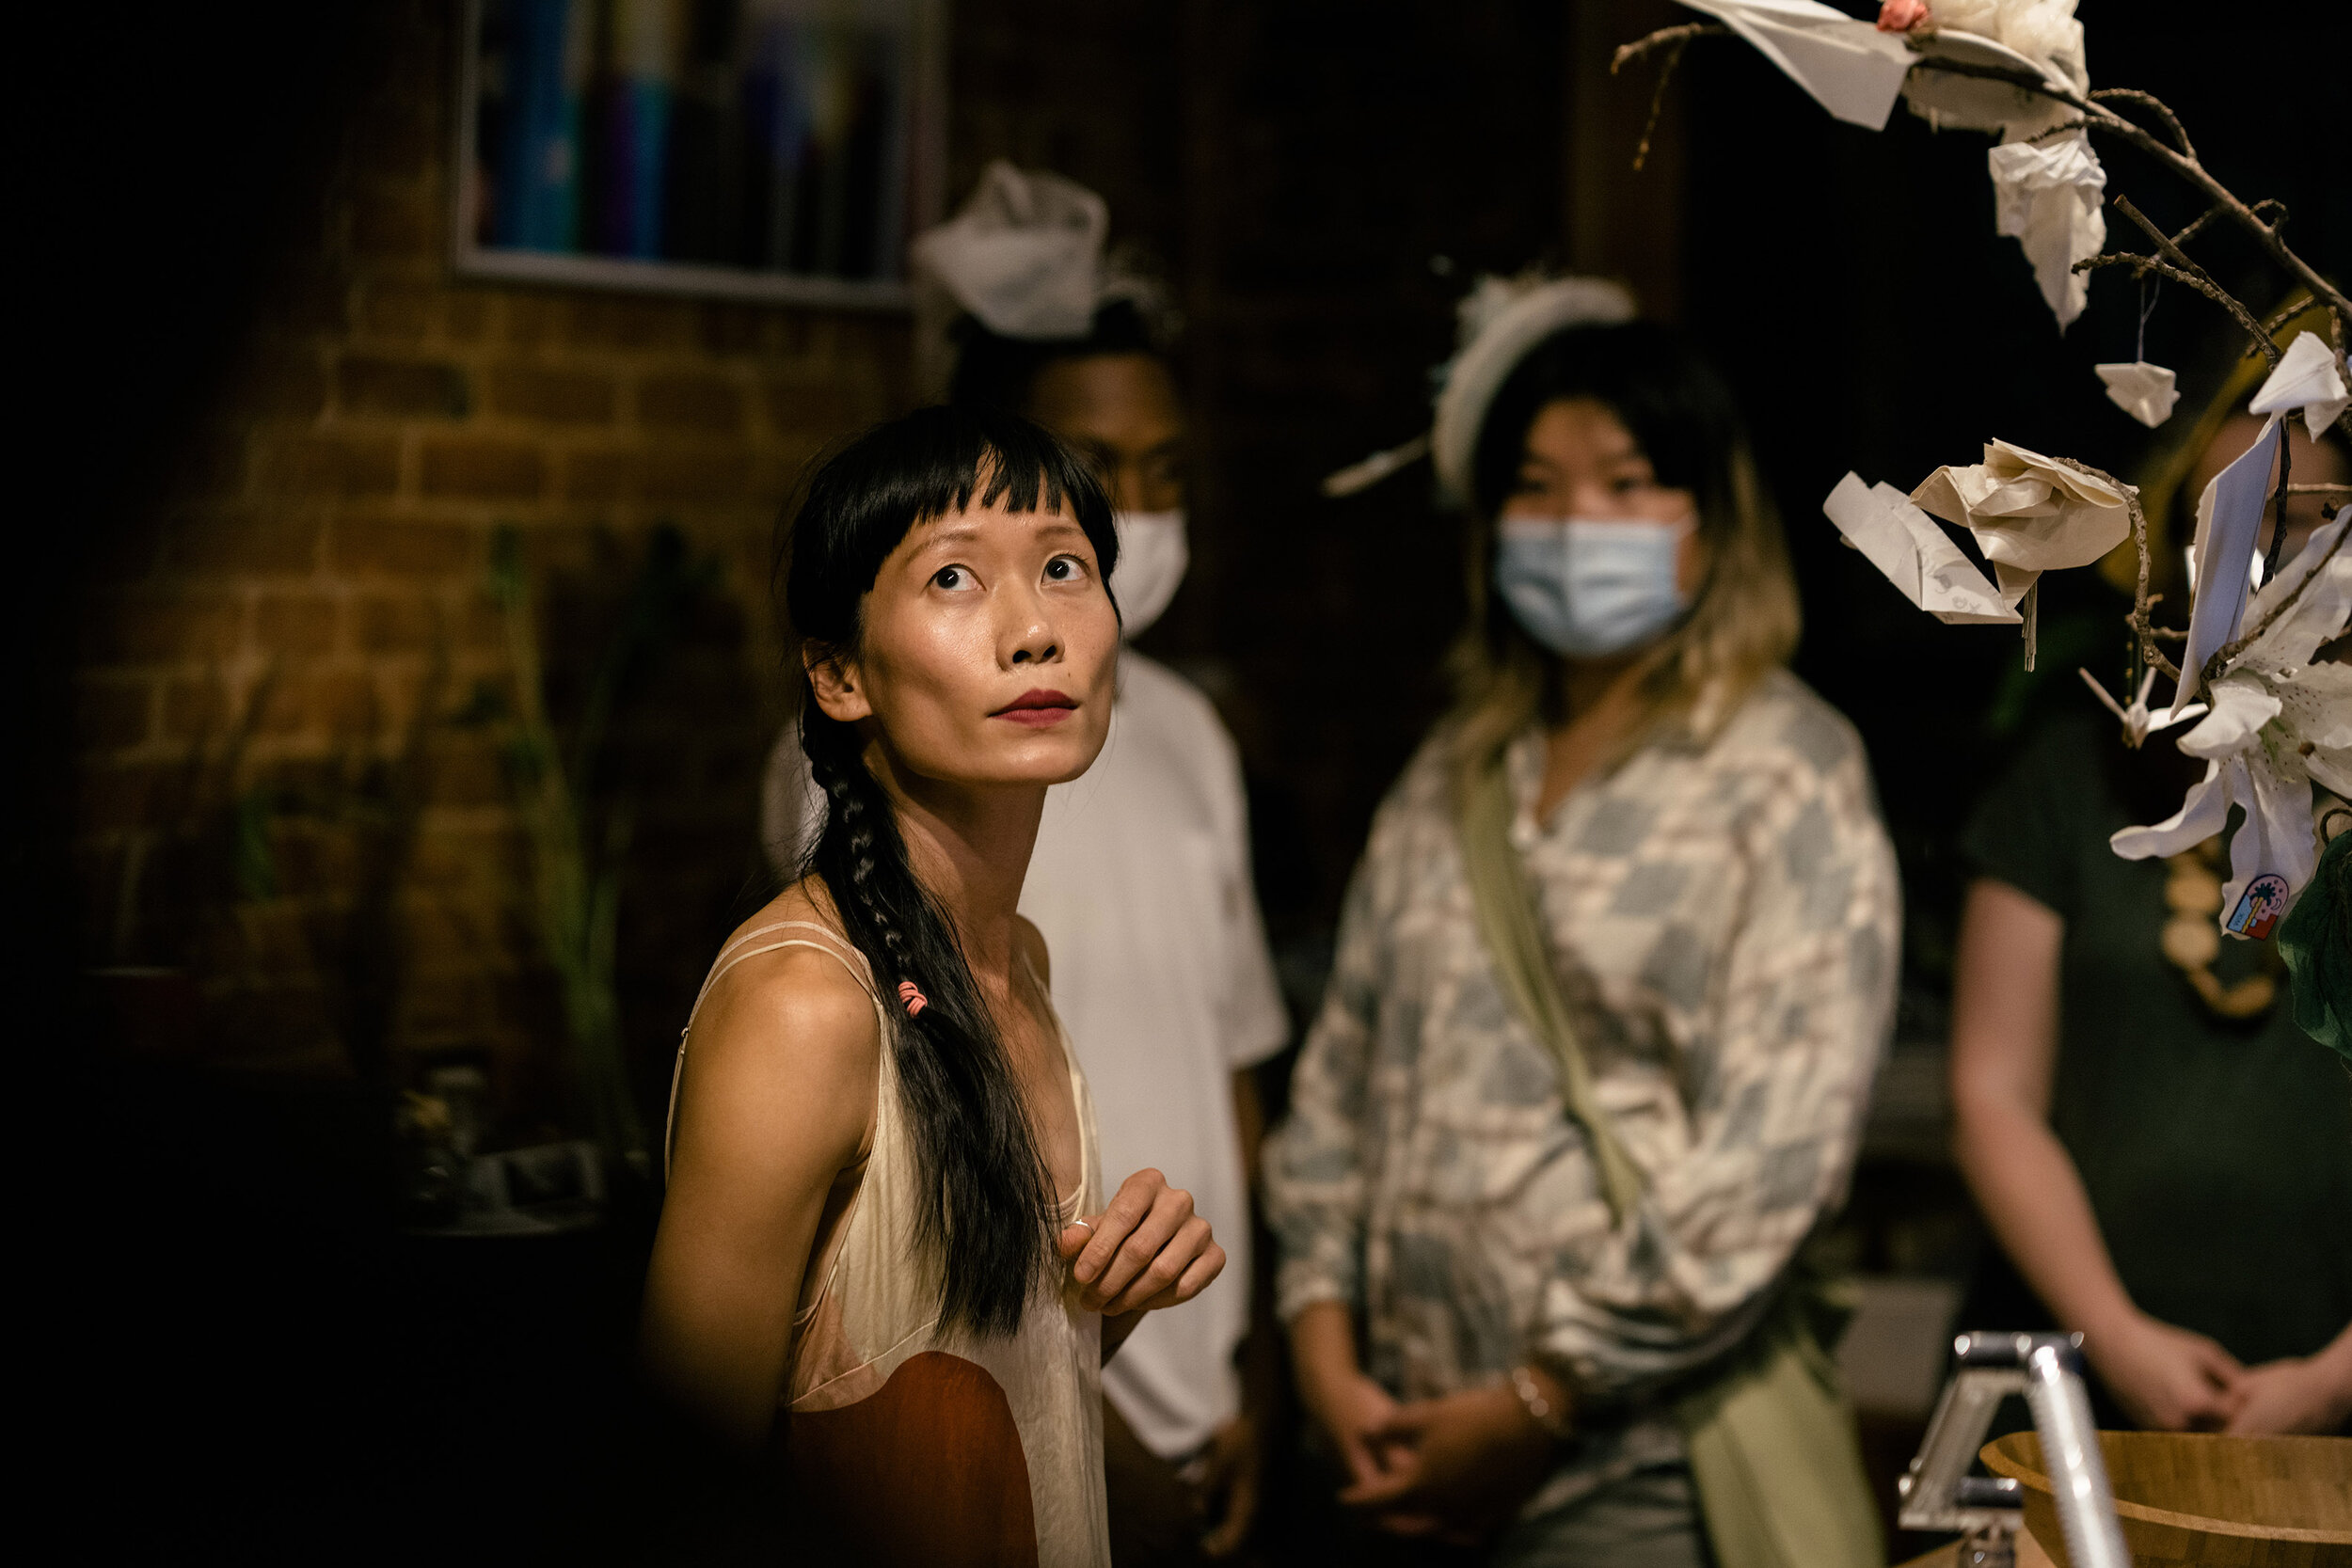  Ching-I Chang performing. Photo: Zhaoyin Wang ©Ching-I Chang, courtesy of Fou Gallery and  How Forests Dream  production team 